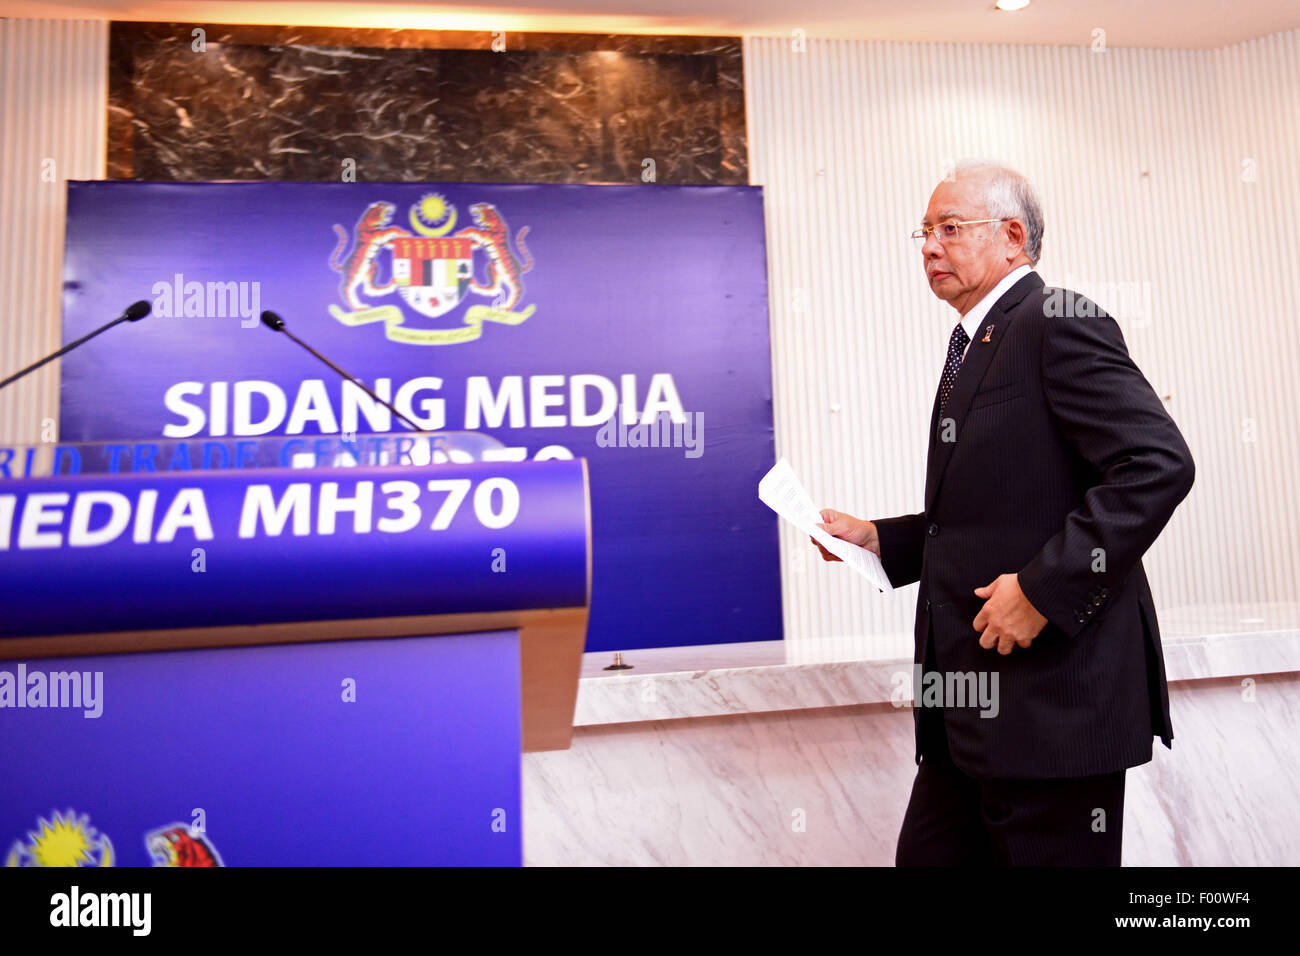 Kuala Lumpur, Malaysia. 5th Aug, 2015. Malaysian Prime Minister Najib Razak attends a press conference on the missing Malaysian Airlines flight MH370 in Kuala Lumpur, Malaysia, Aug. 5, 2015. Verification had confirmed that the debris discovered on the Reunion Island belongs to the missing Malaysian Airlines flight MH370, Malaysian Prime Minister Najib Razak announced here early on Thursday. Credit:  Chong Voon Chung/Xinhua/Alamy Live News Stock Photo